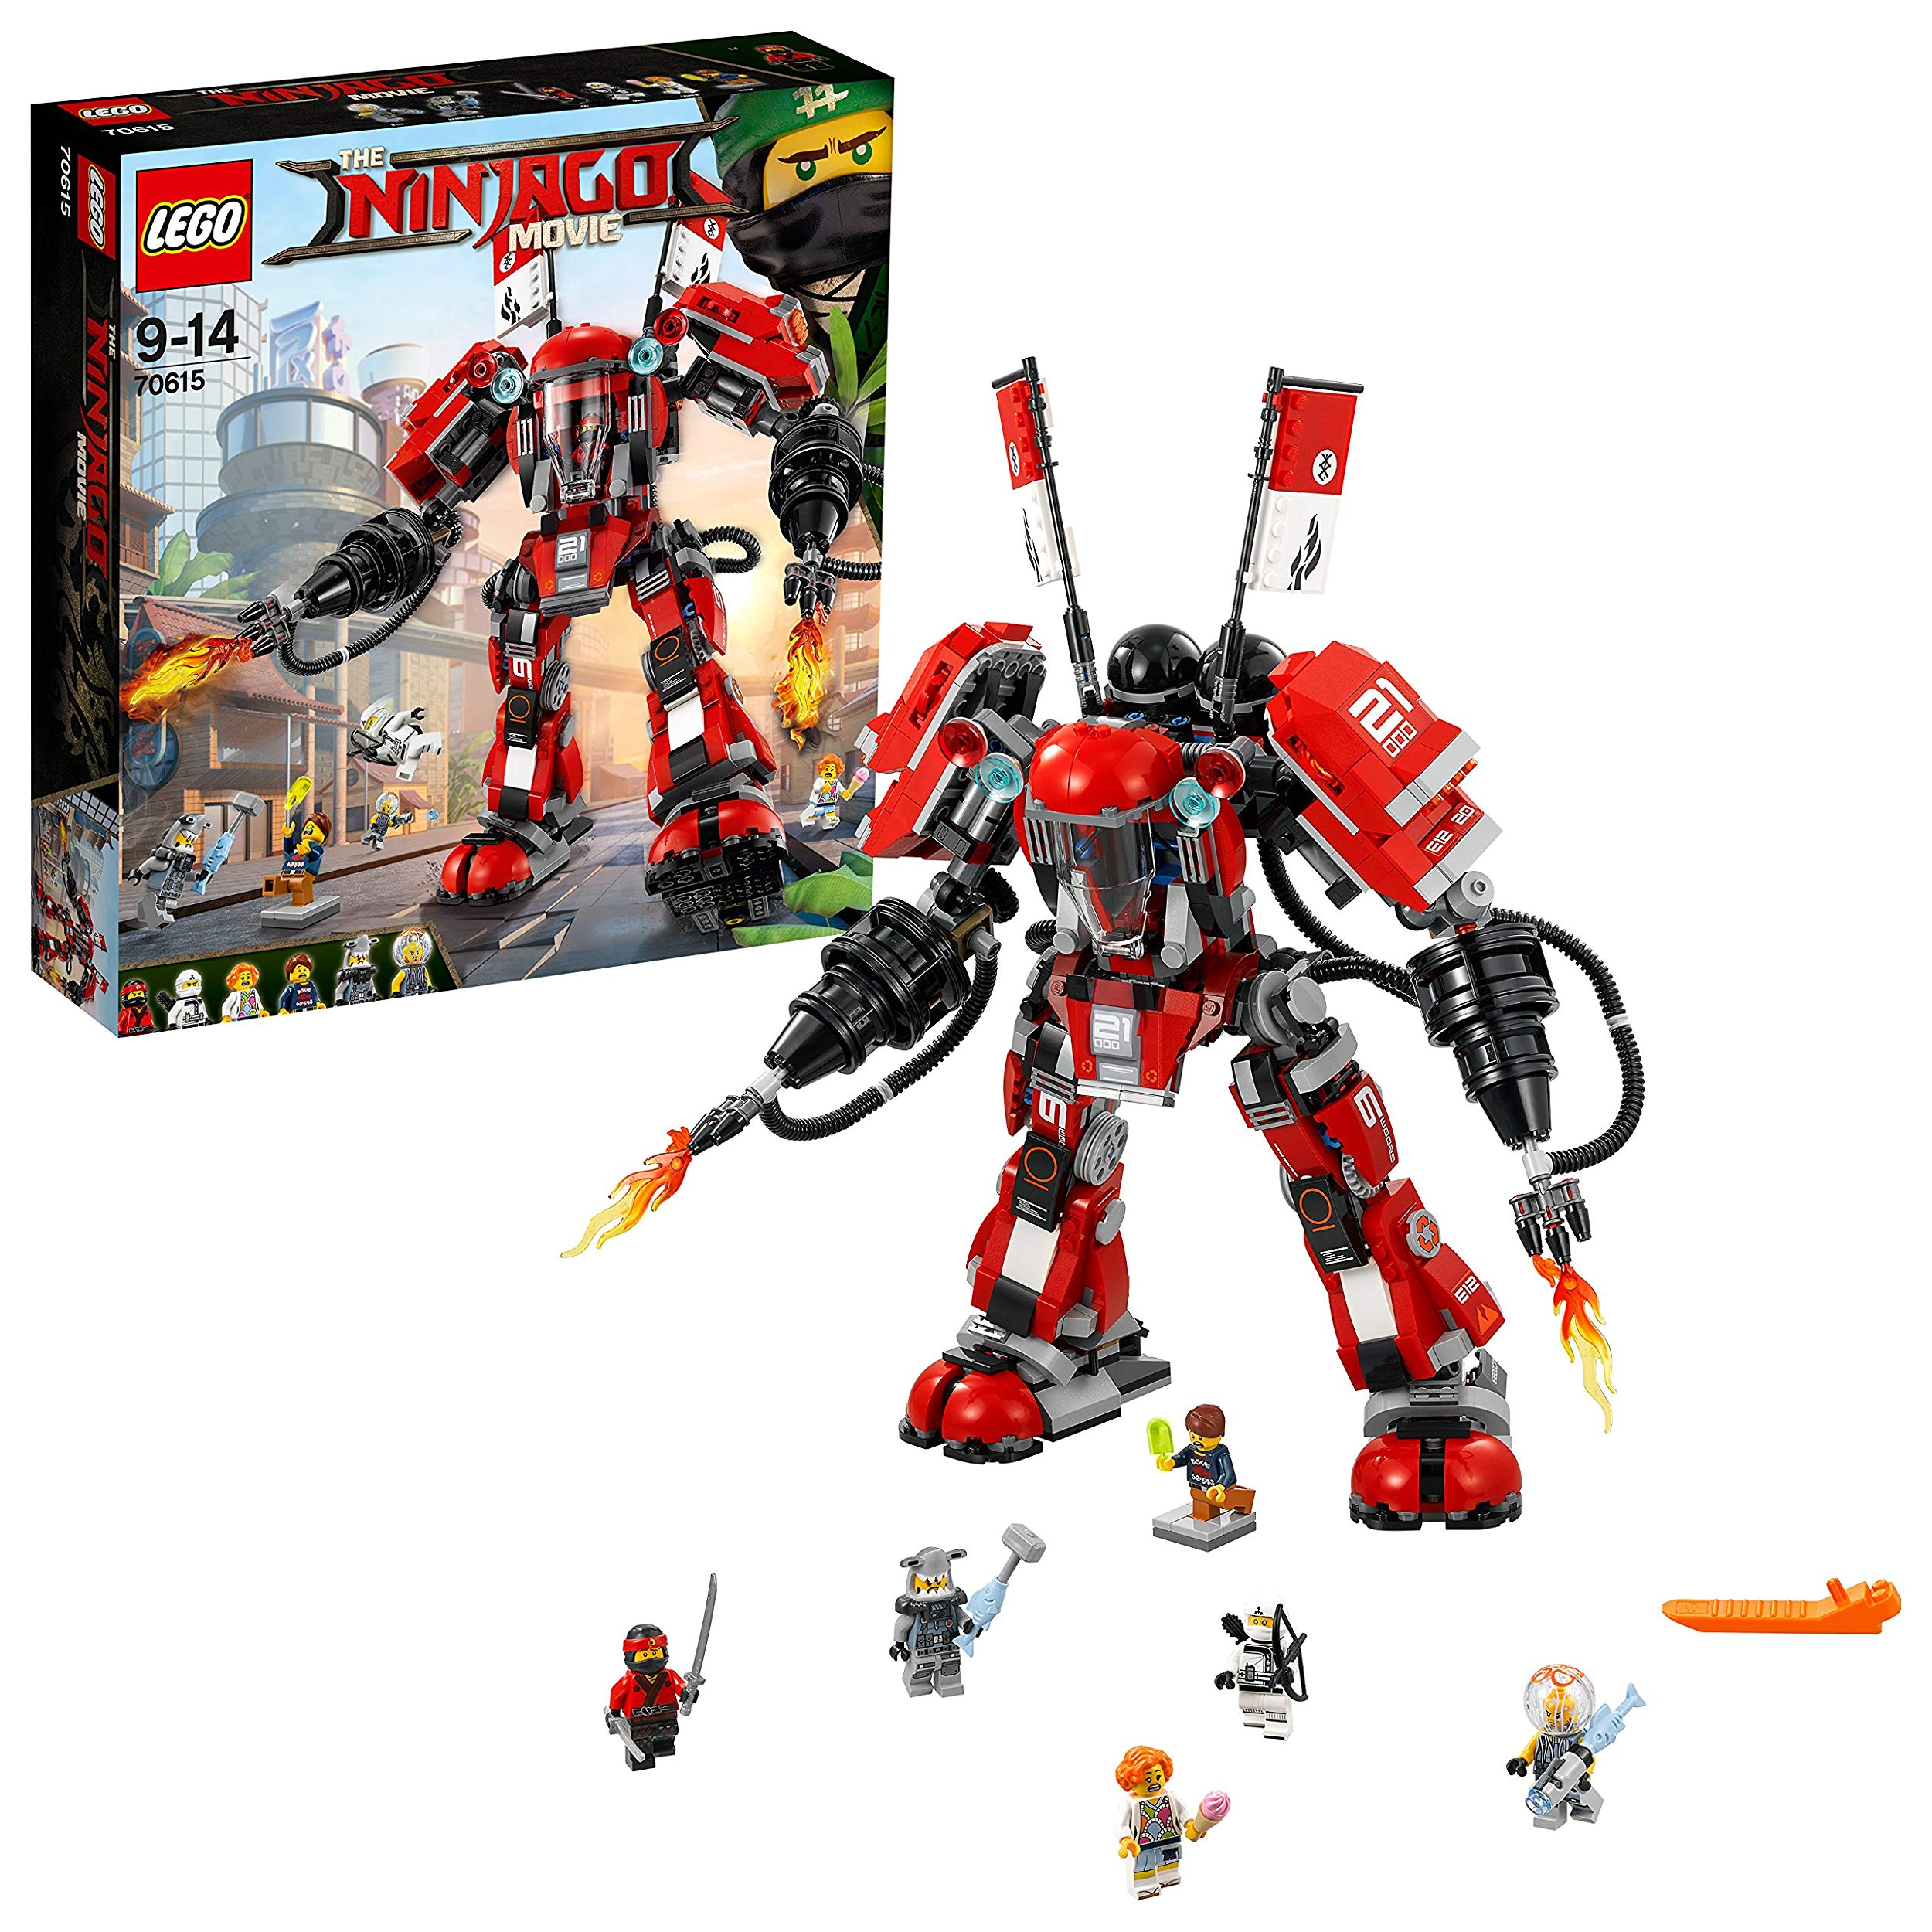 Lego Ninjago The Movie Kais Fire Mech Available For Immediate Delivery